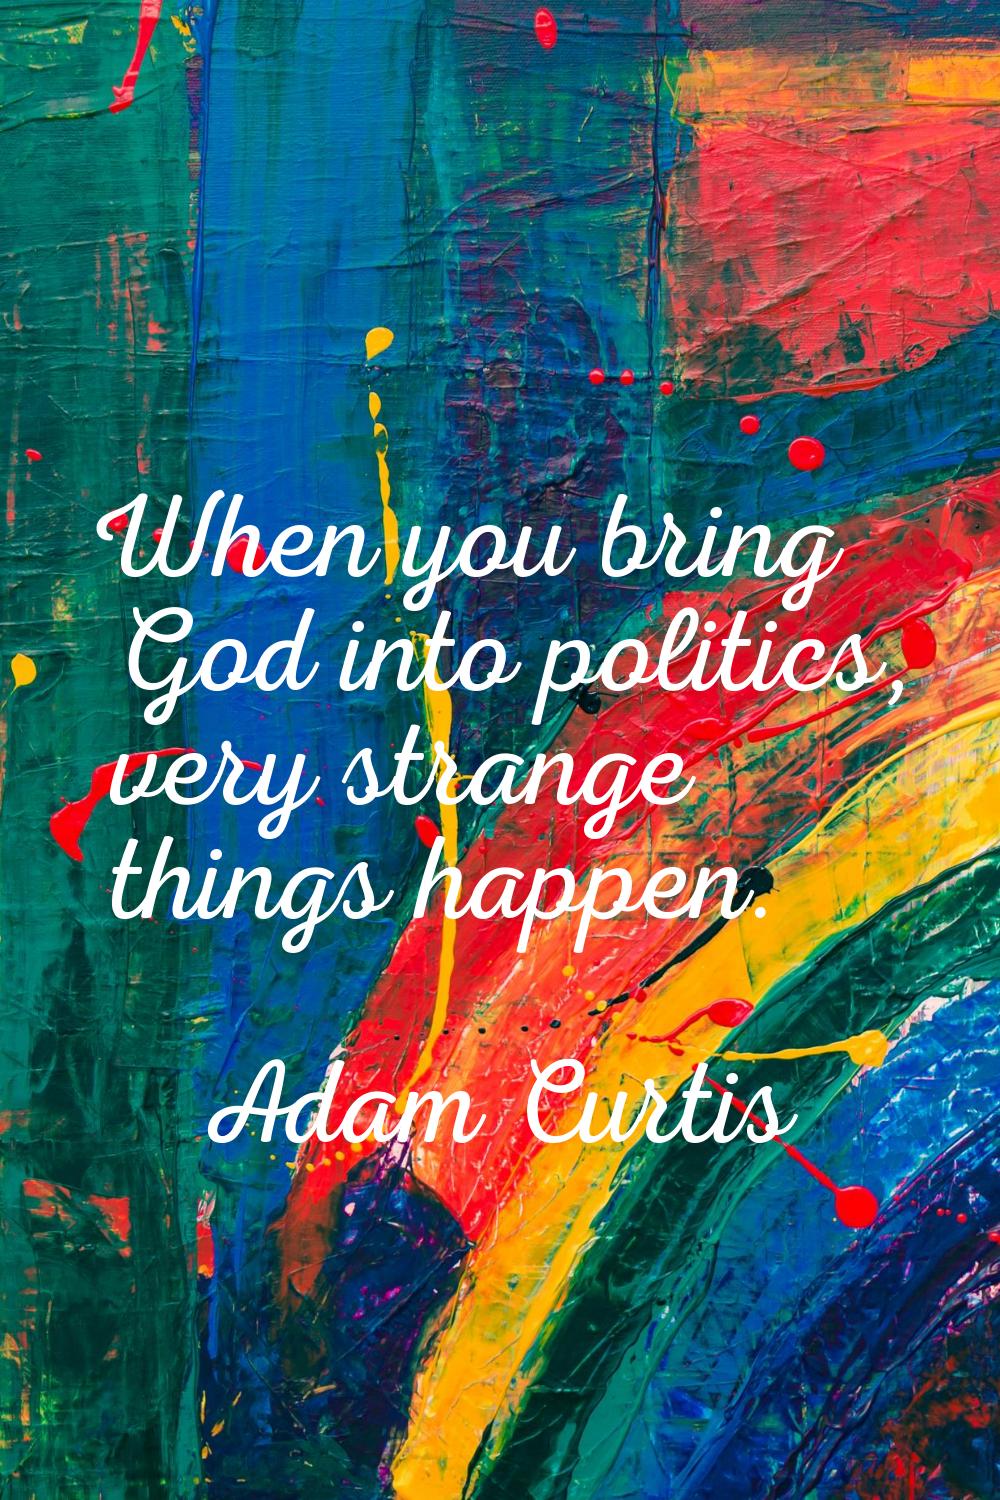 When you bring God into politics, very strange things happen.